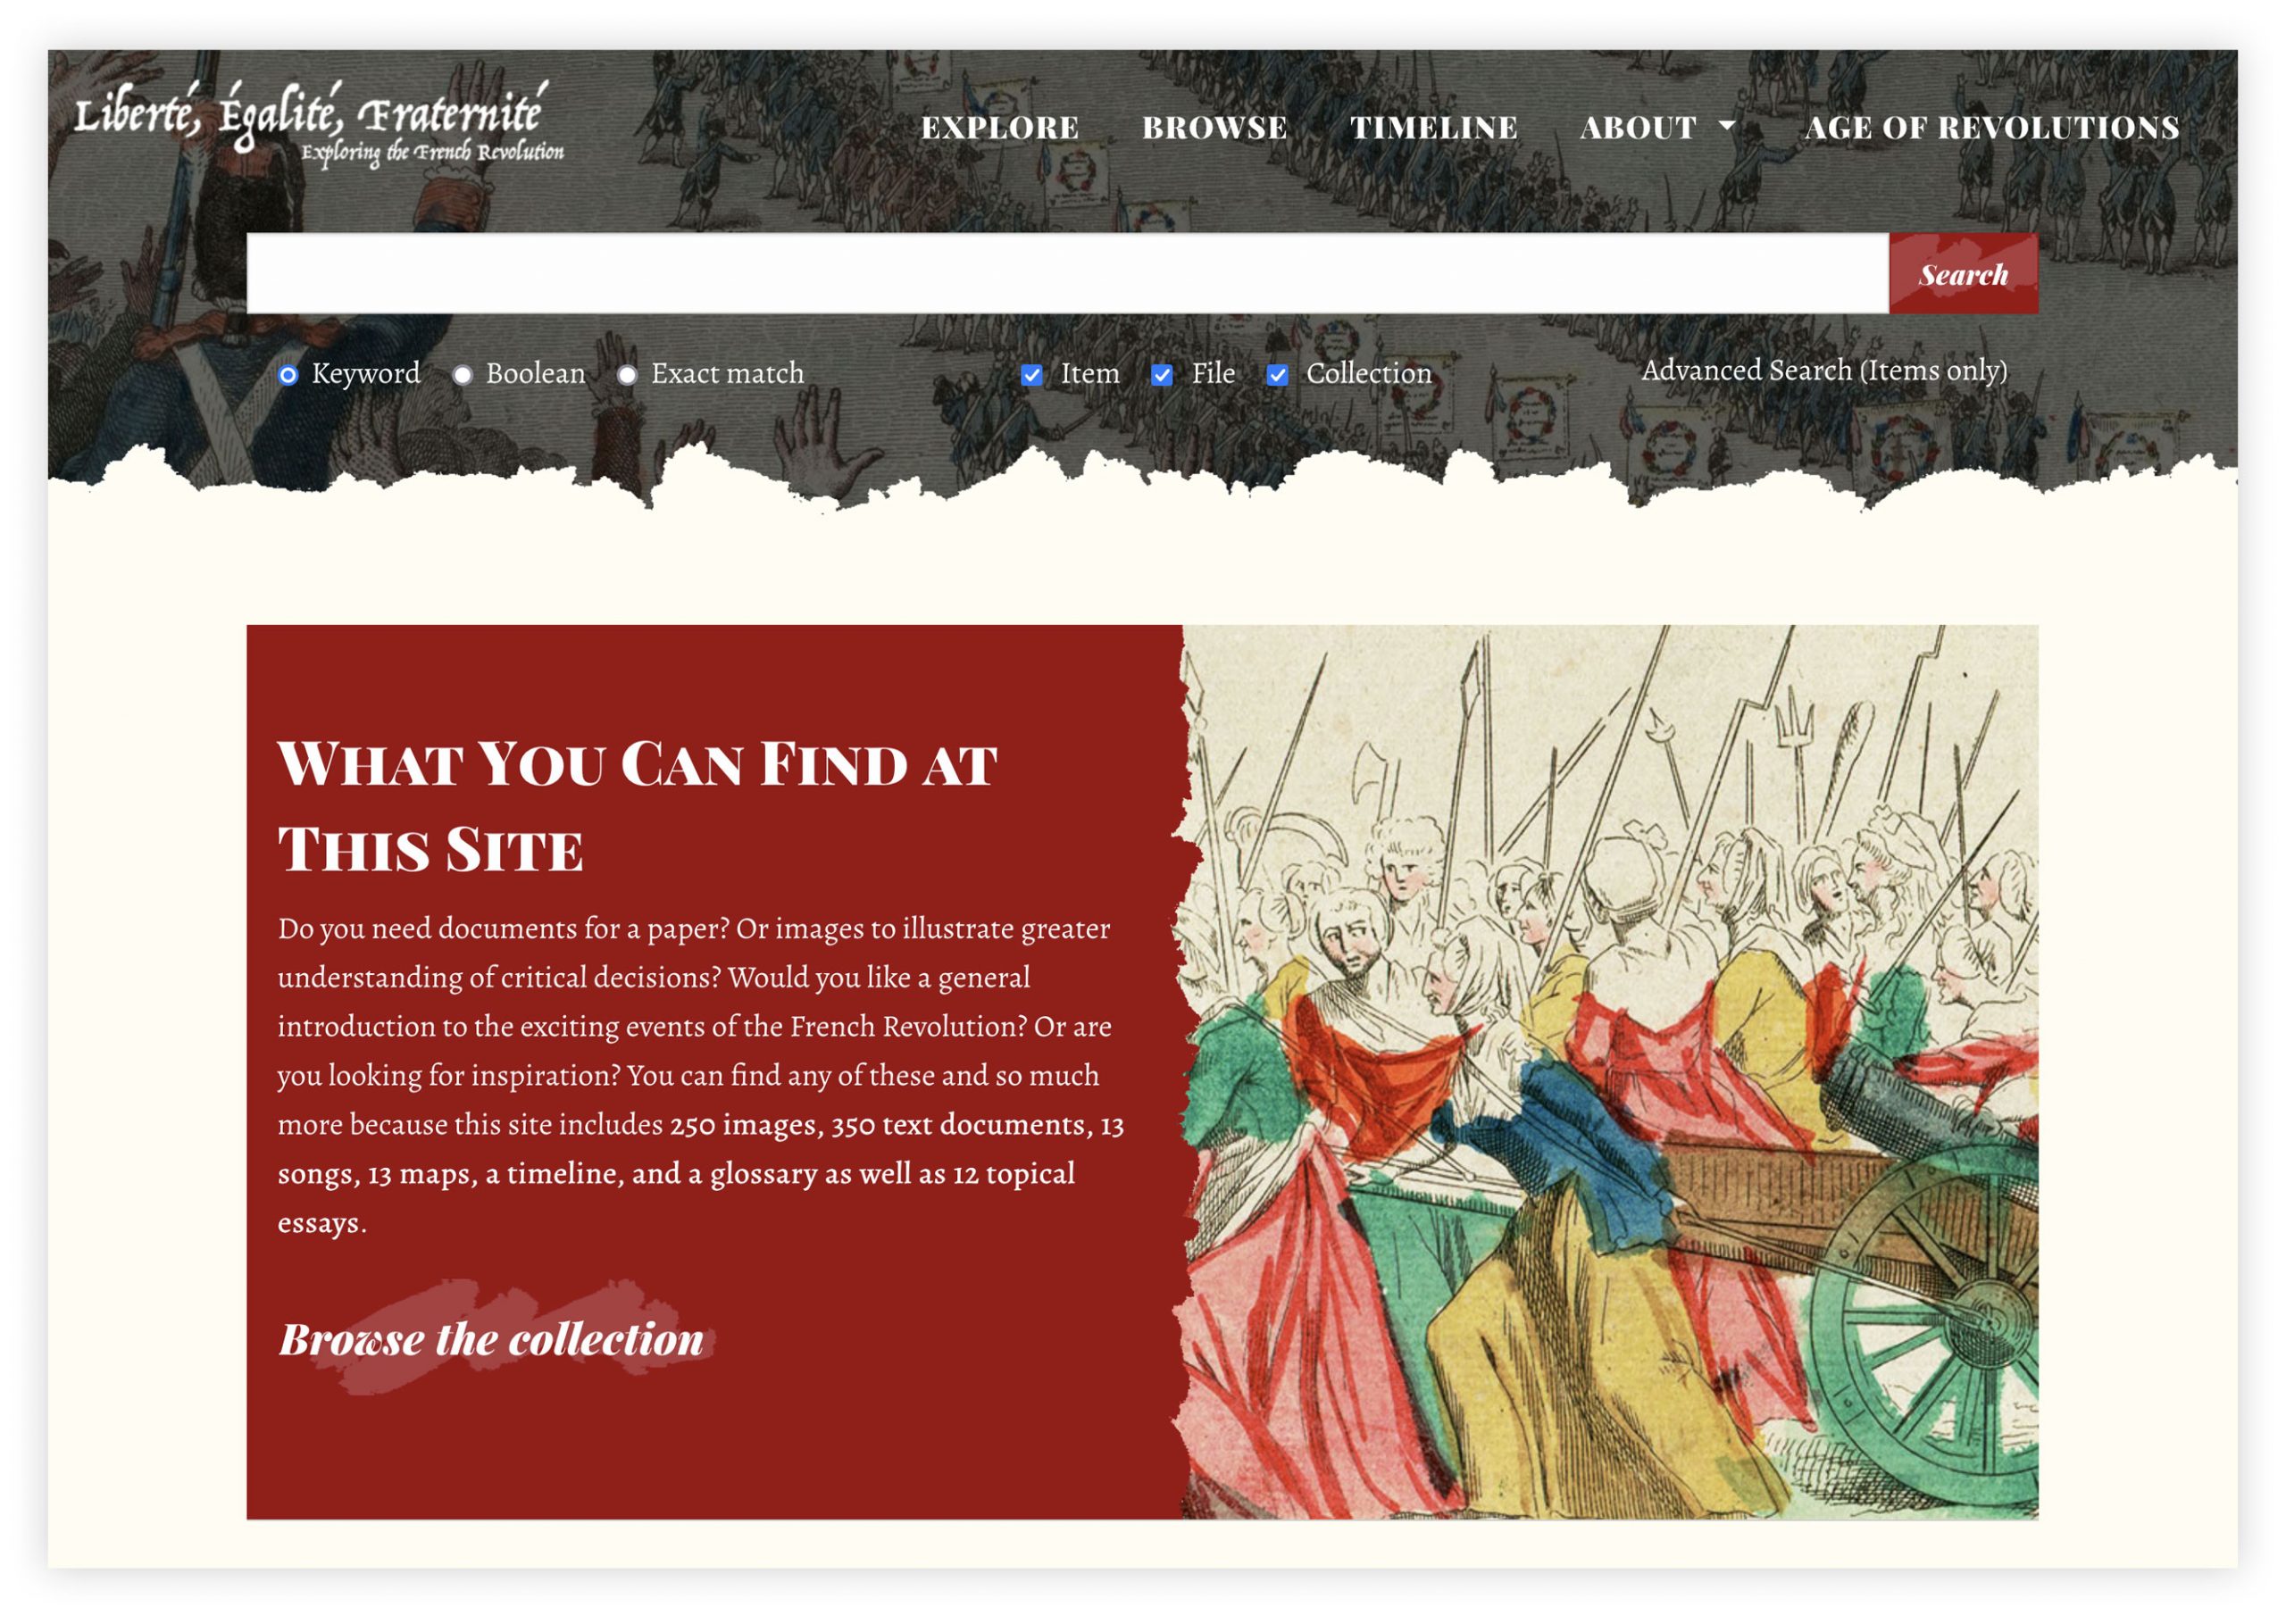 Screengrab of the Liberte, Egalite, Fraternite website home page.